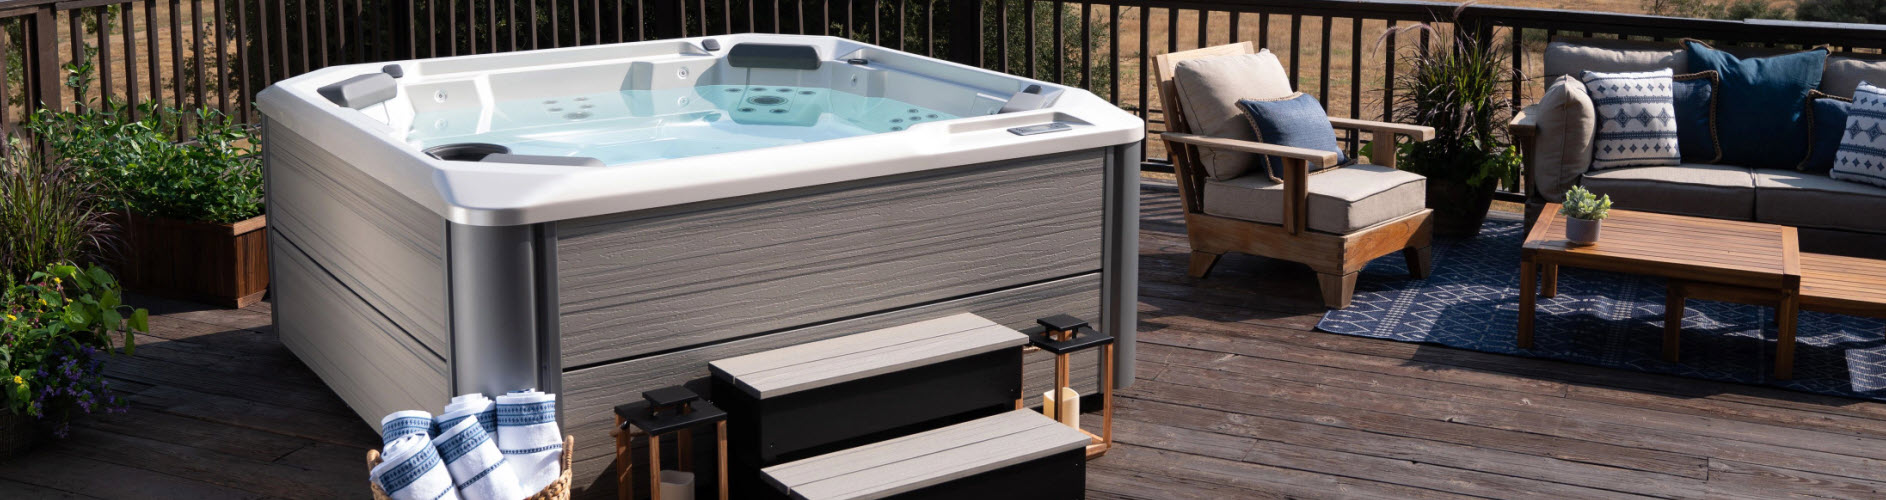 Pursue More Natural Pain Relief with a Backyard Spa at Home, Hot Tub Sale Milwaukee